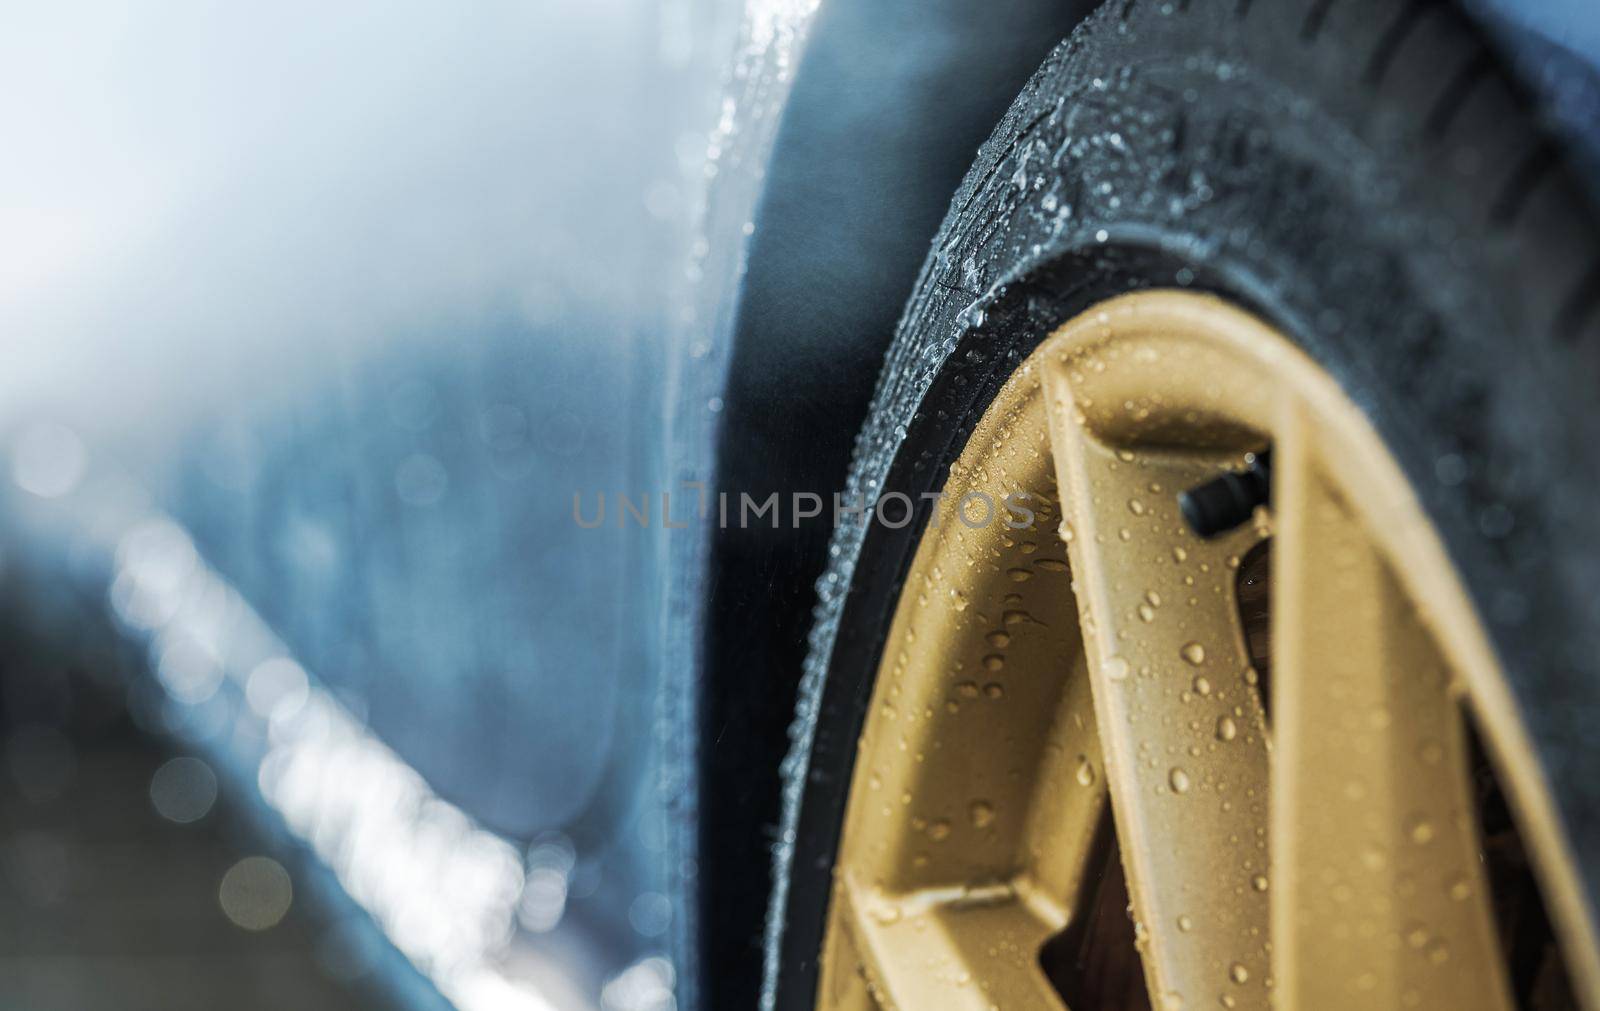 Weather Elements and the Car Wheels. Water on Elegant Golden Alloy Wheels. Transportation and Automotive Industry Theme.